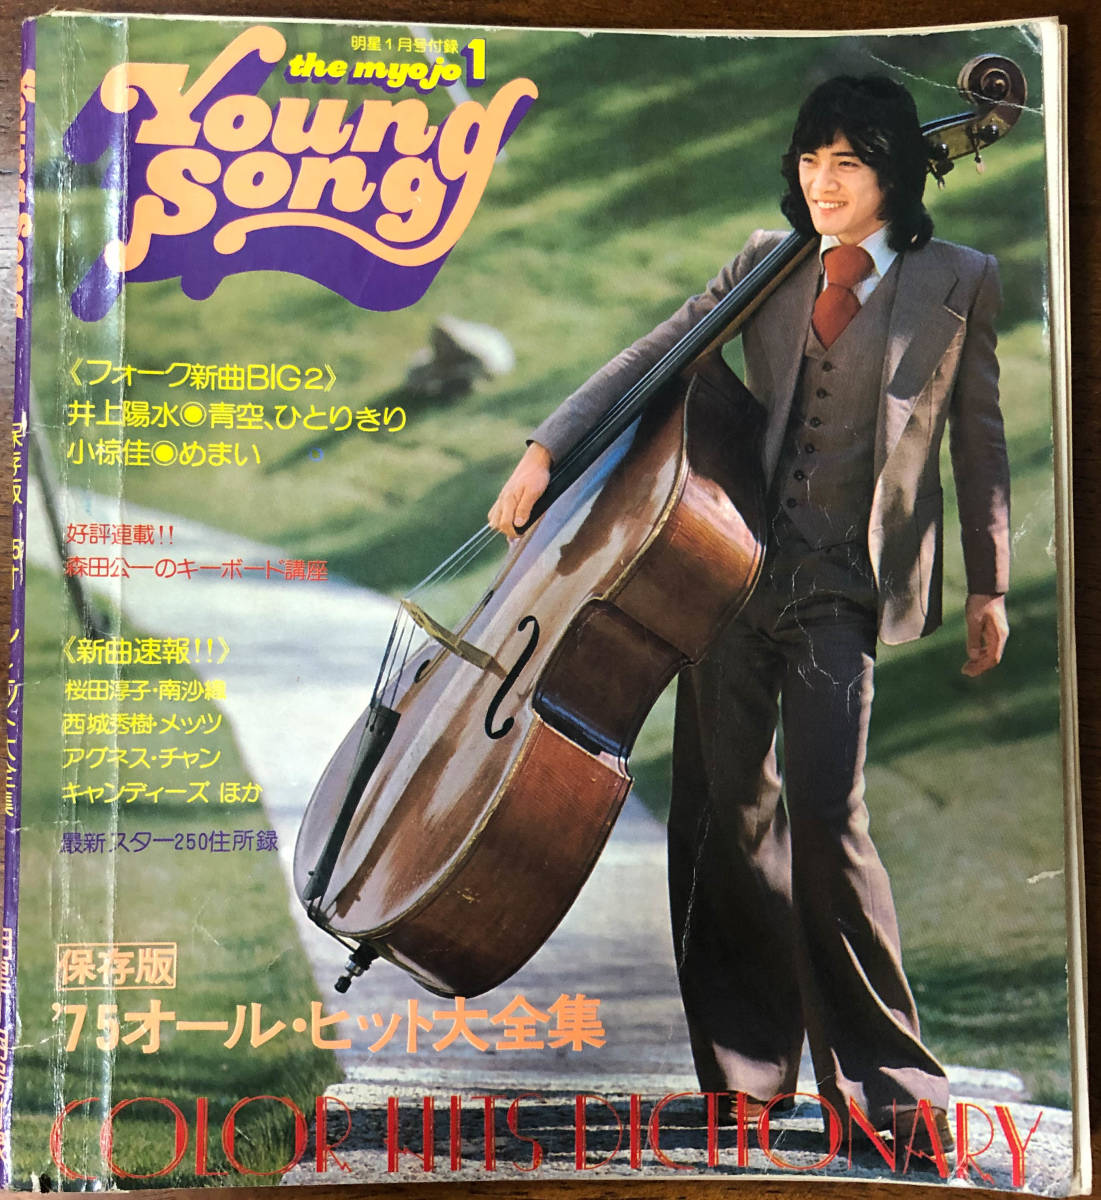 YOUNG SONG shining star 1976 year 1 month number appendix 